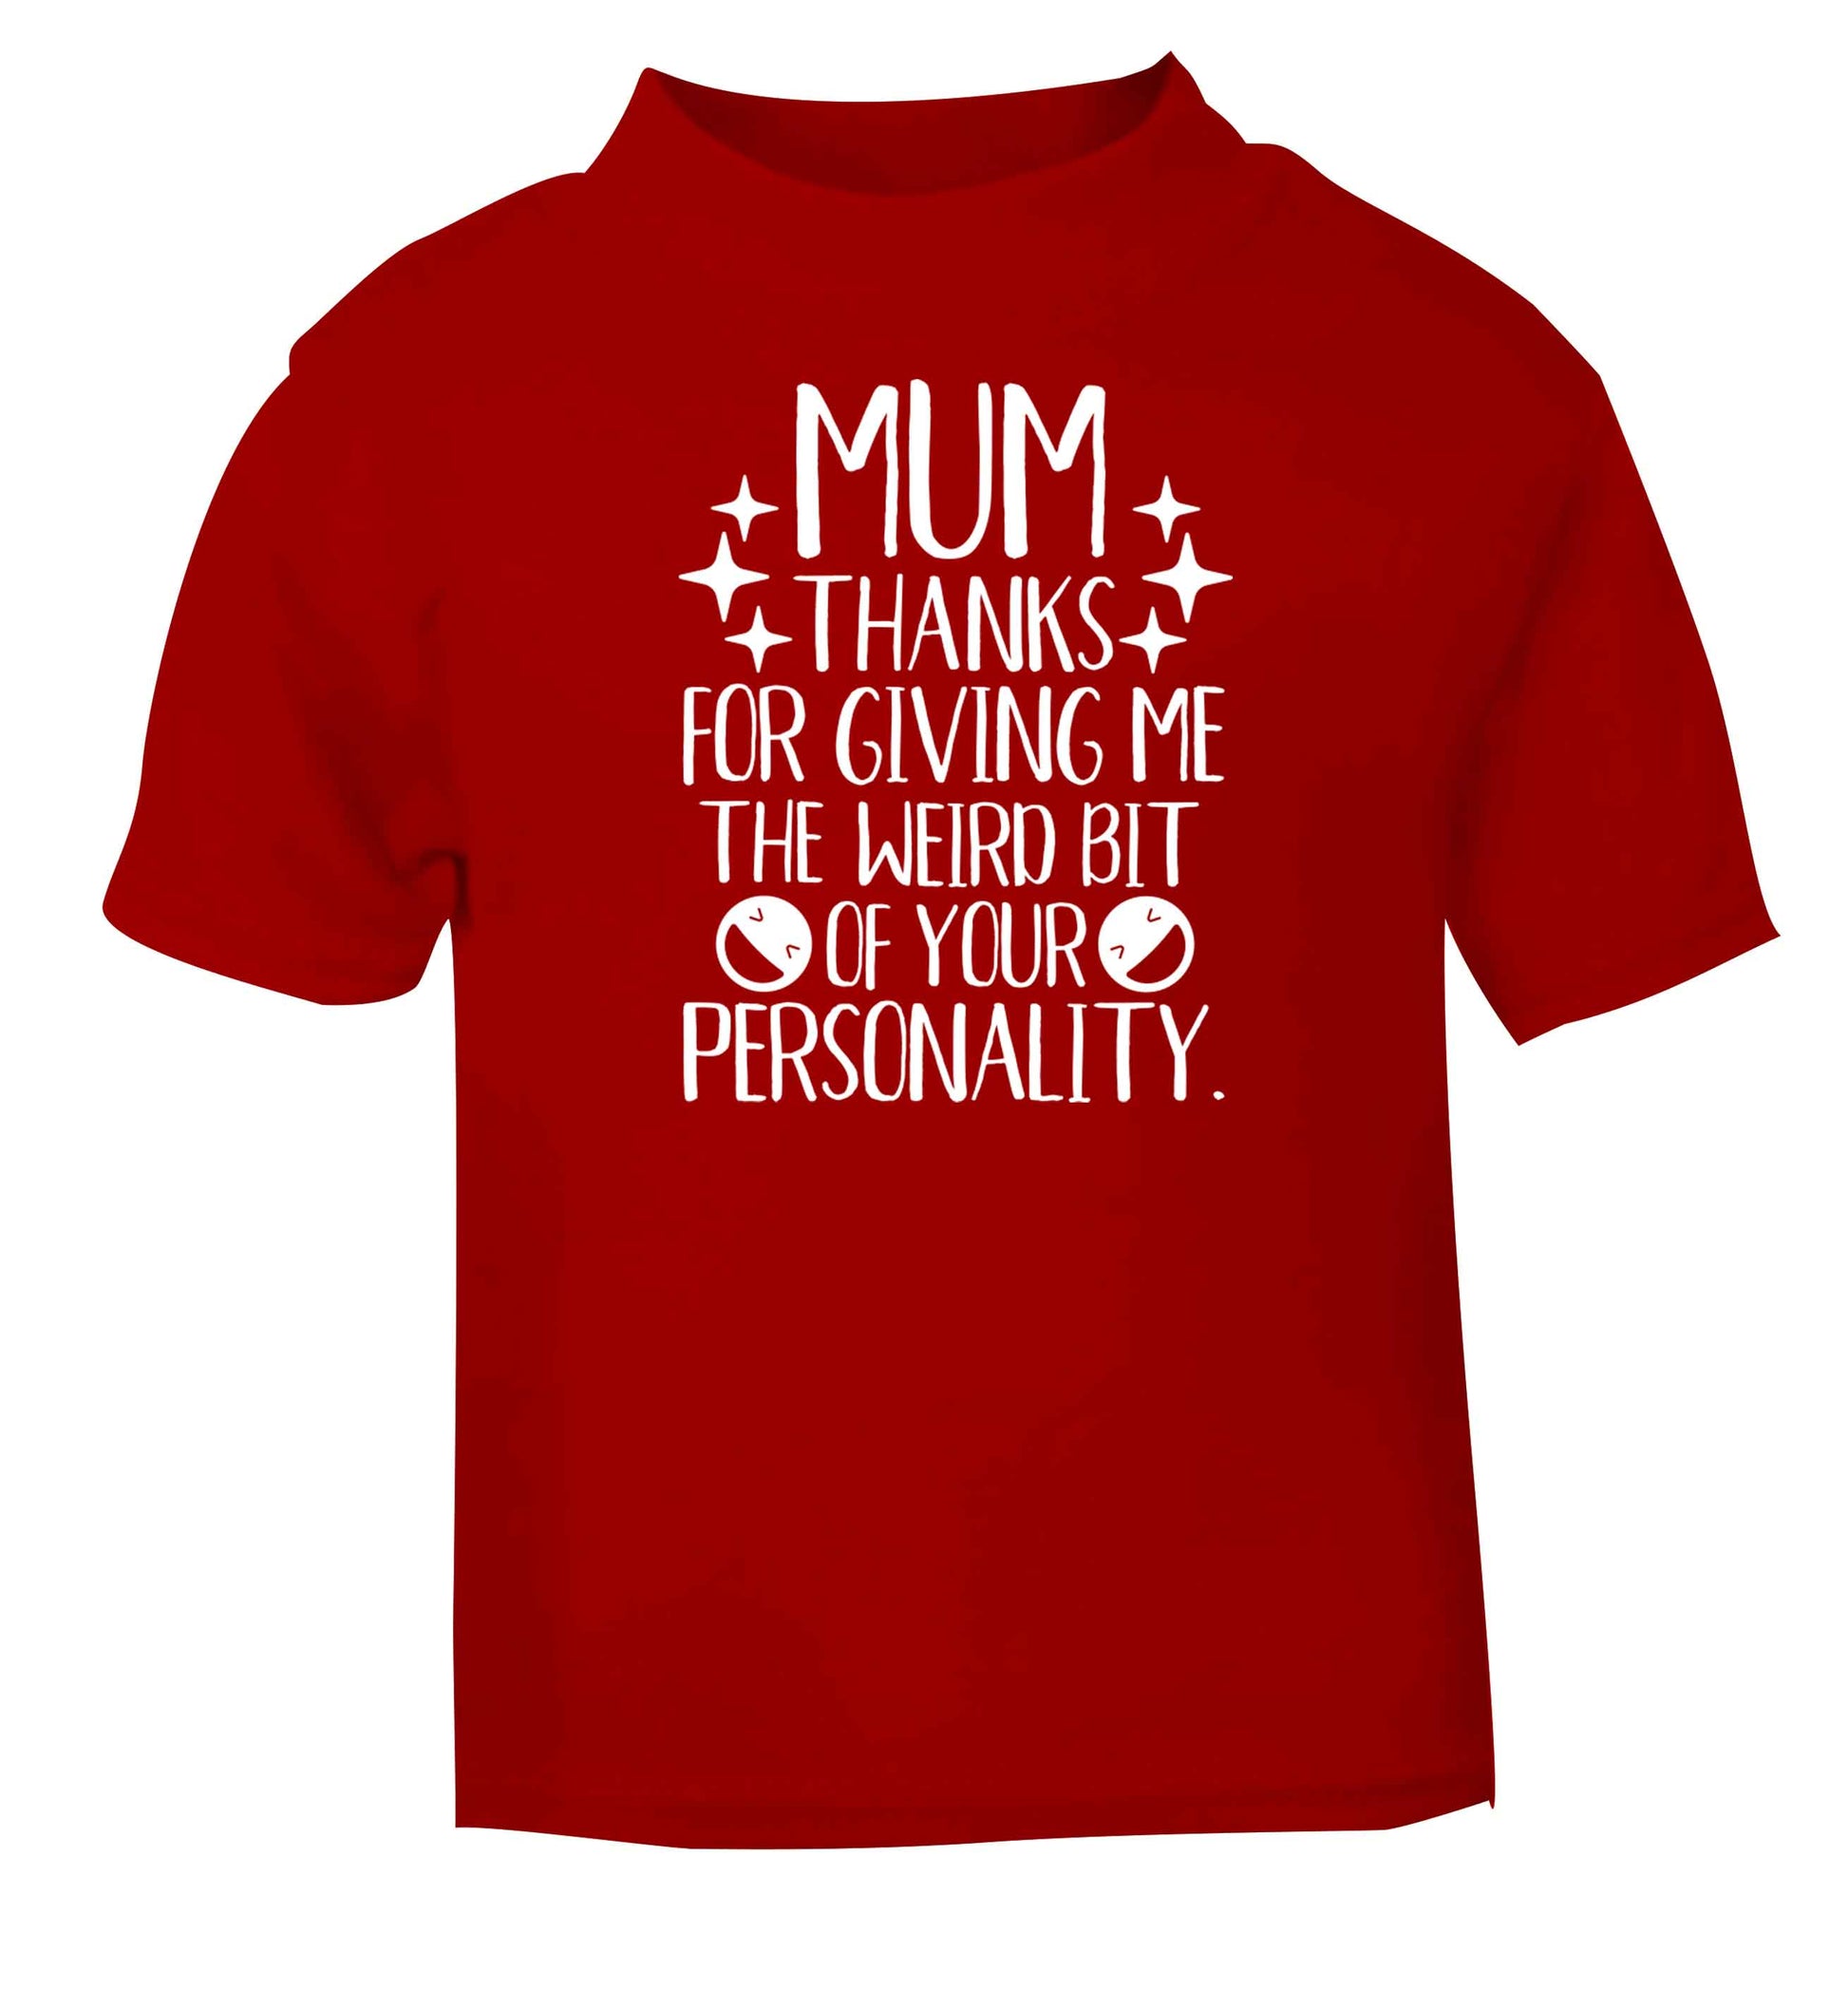 Mum thanks for giving me the weird bit of your personality red baby toddler Tshirt 2 Years